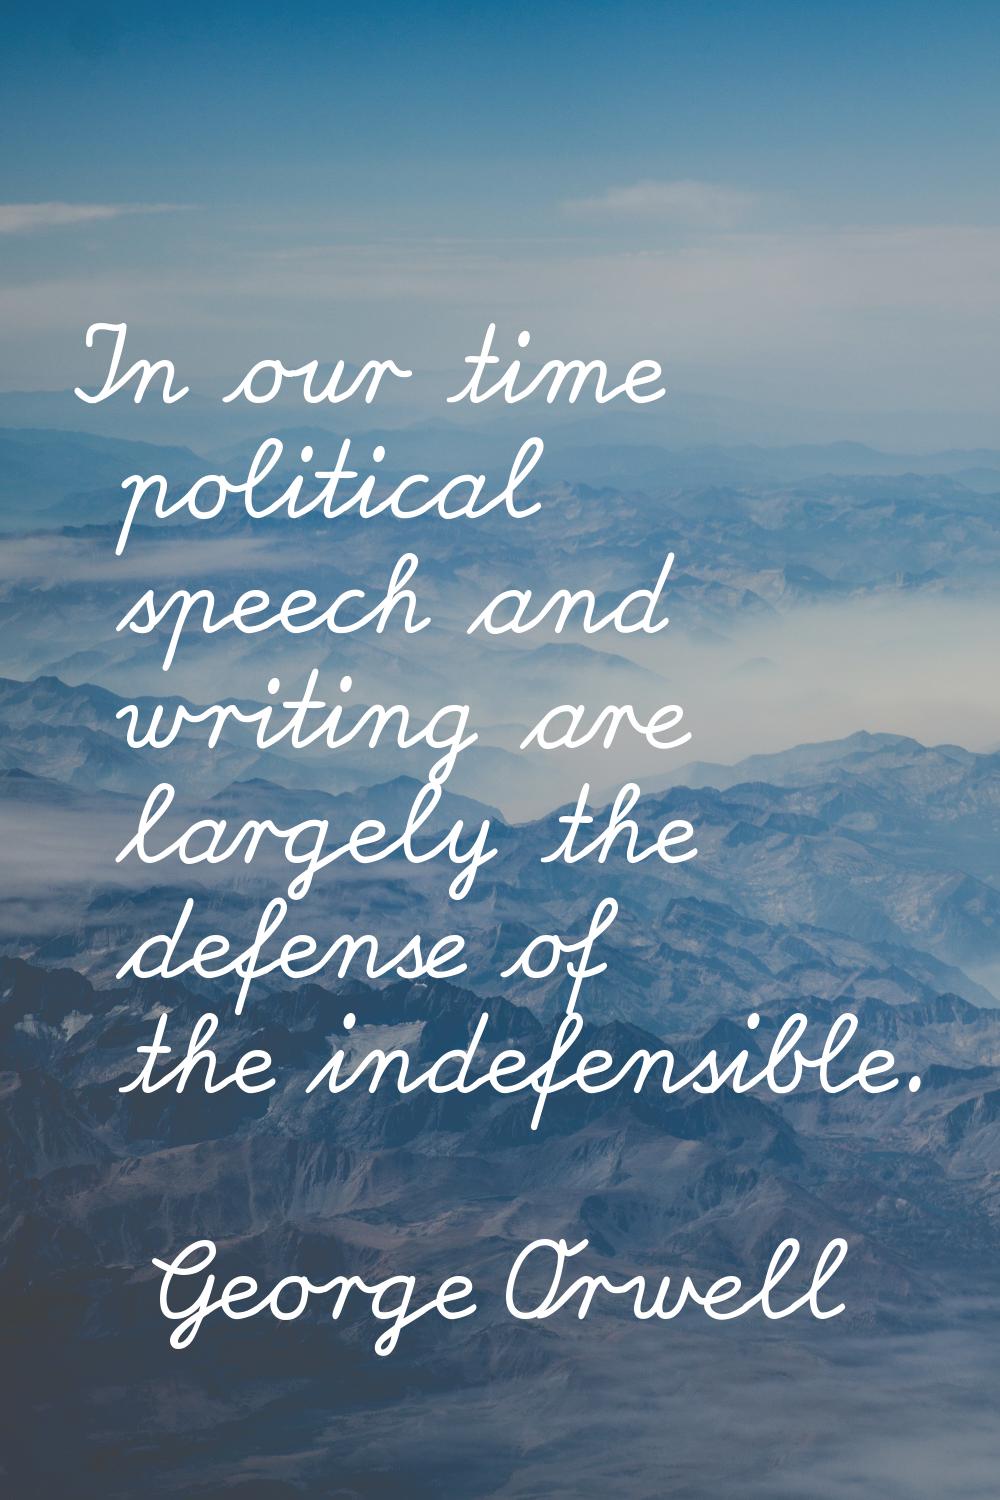 In our time political speech and writing are largely the defense of the indefensible.